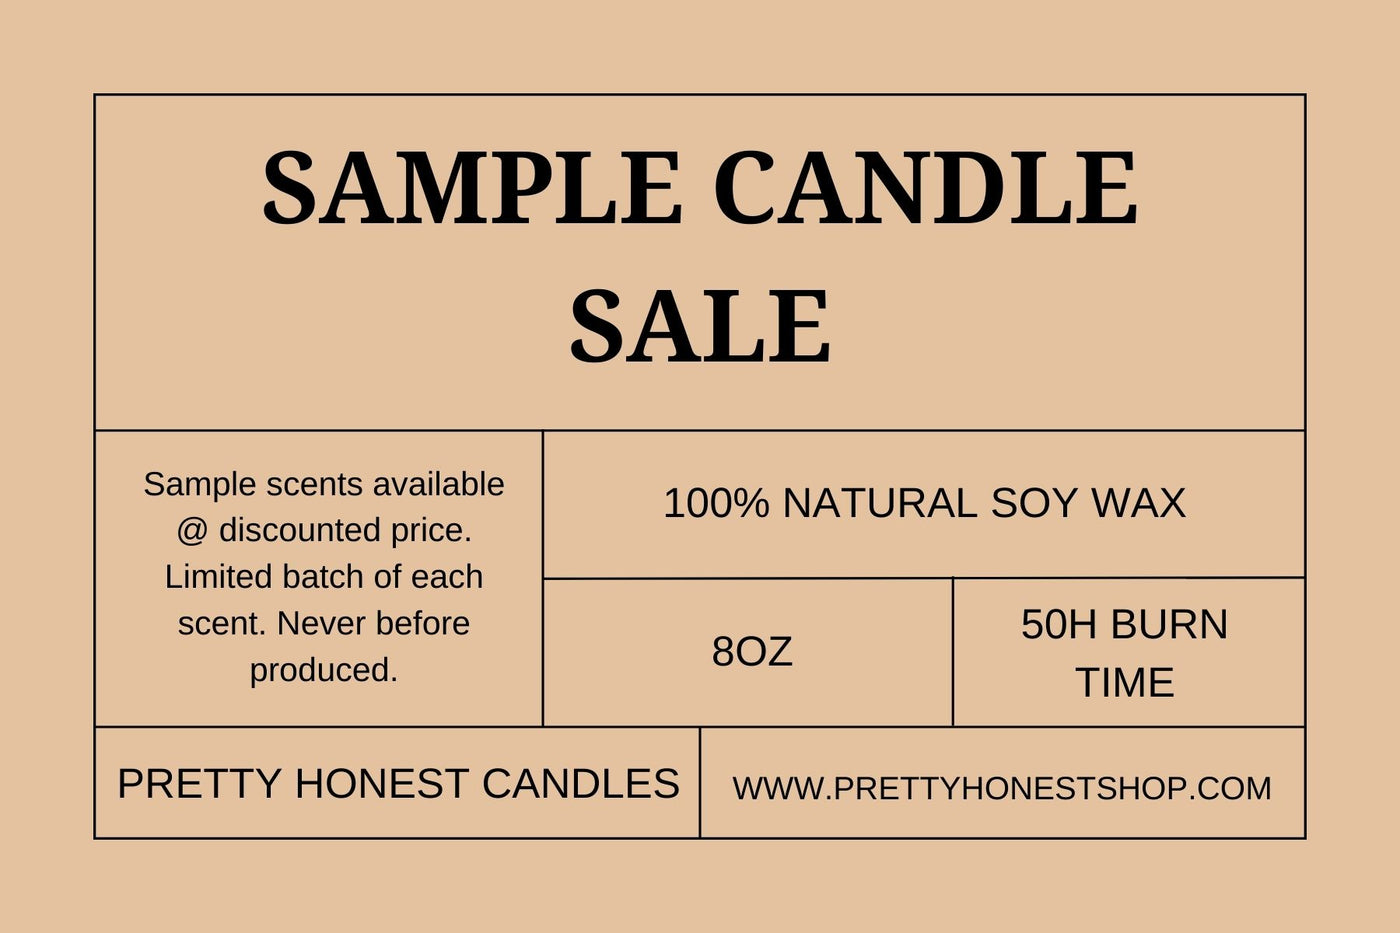 Sample Candle Sale